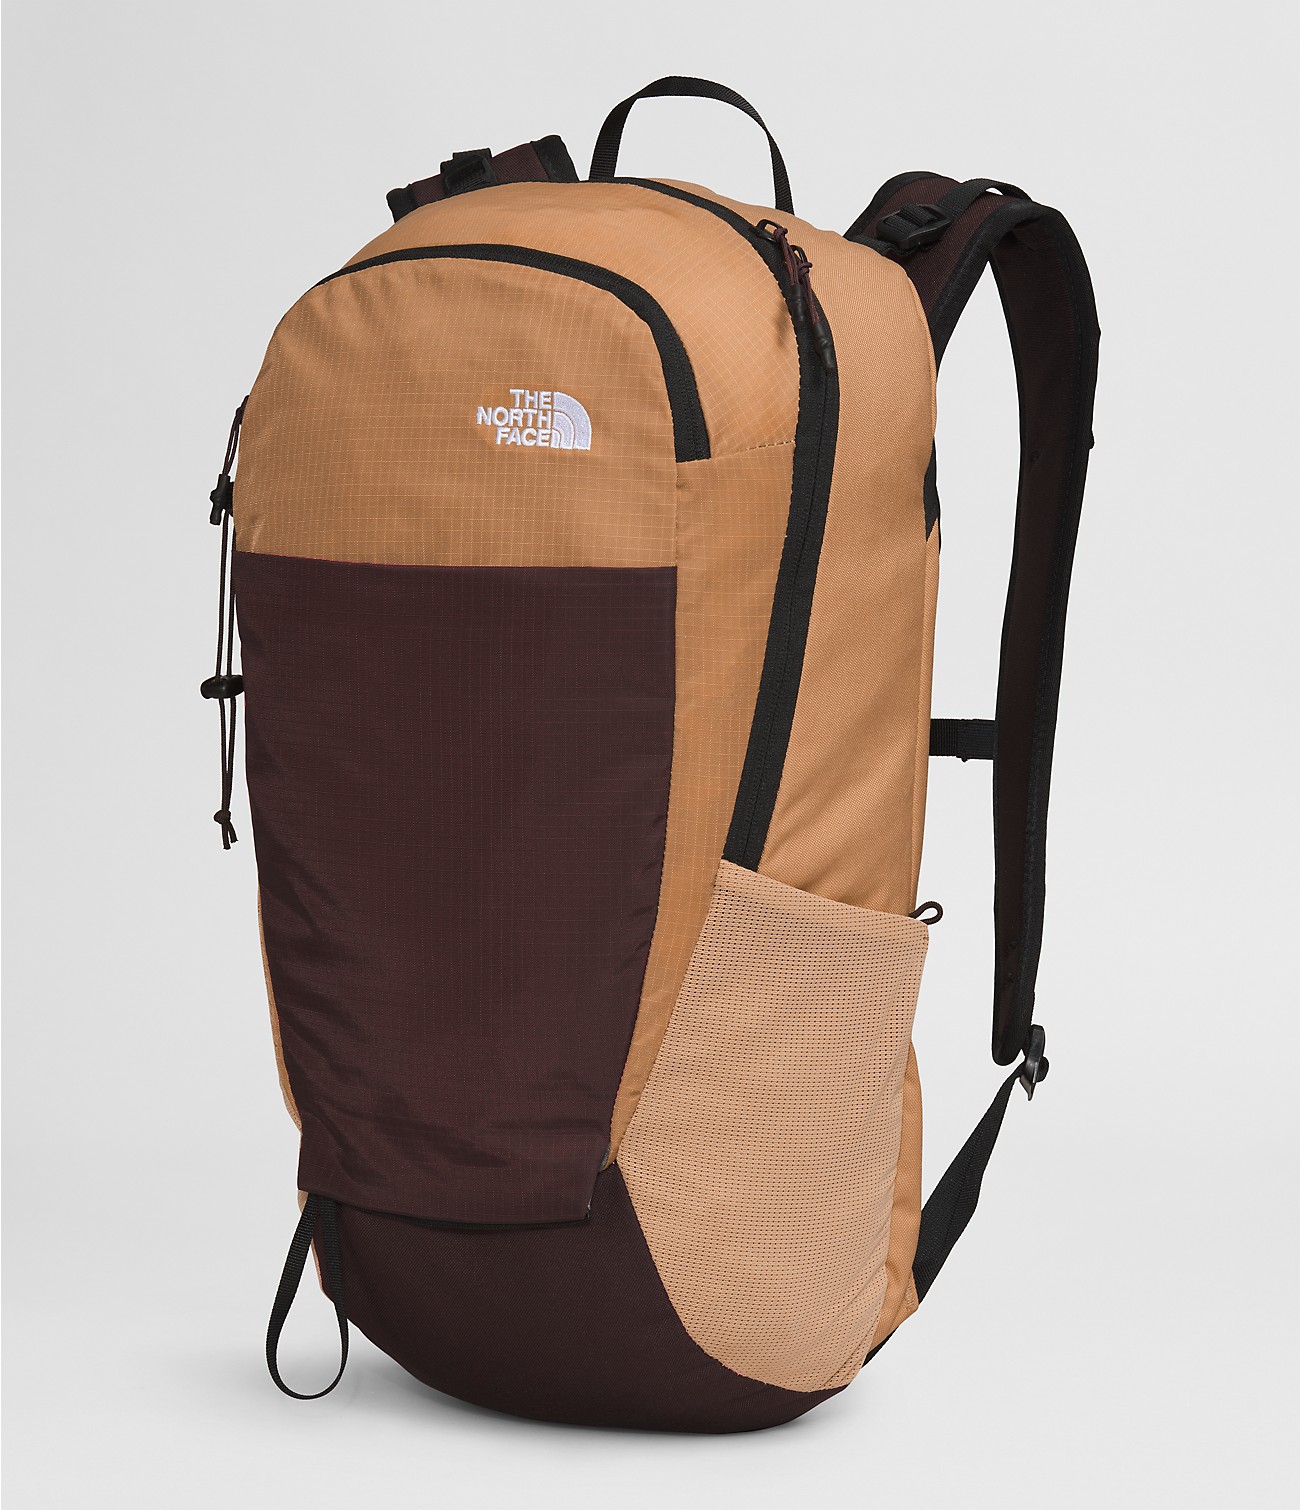 Unlock Wilderness' choice in the North Face Vs Quecha comparison, the Basin 18 Backpack by The North Face